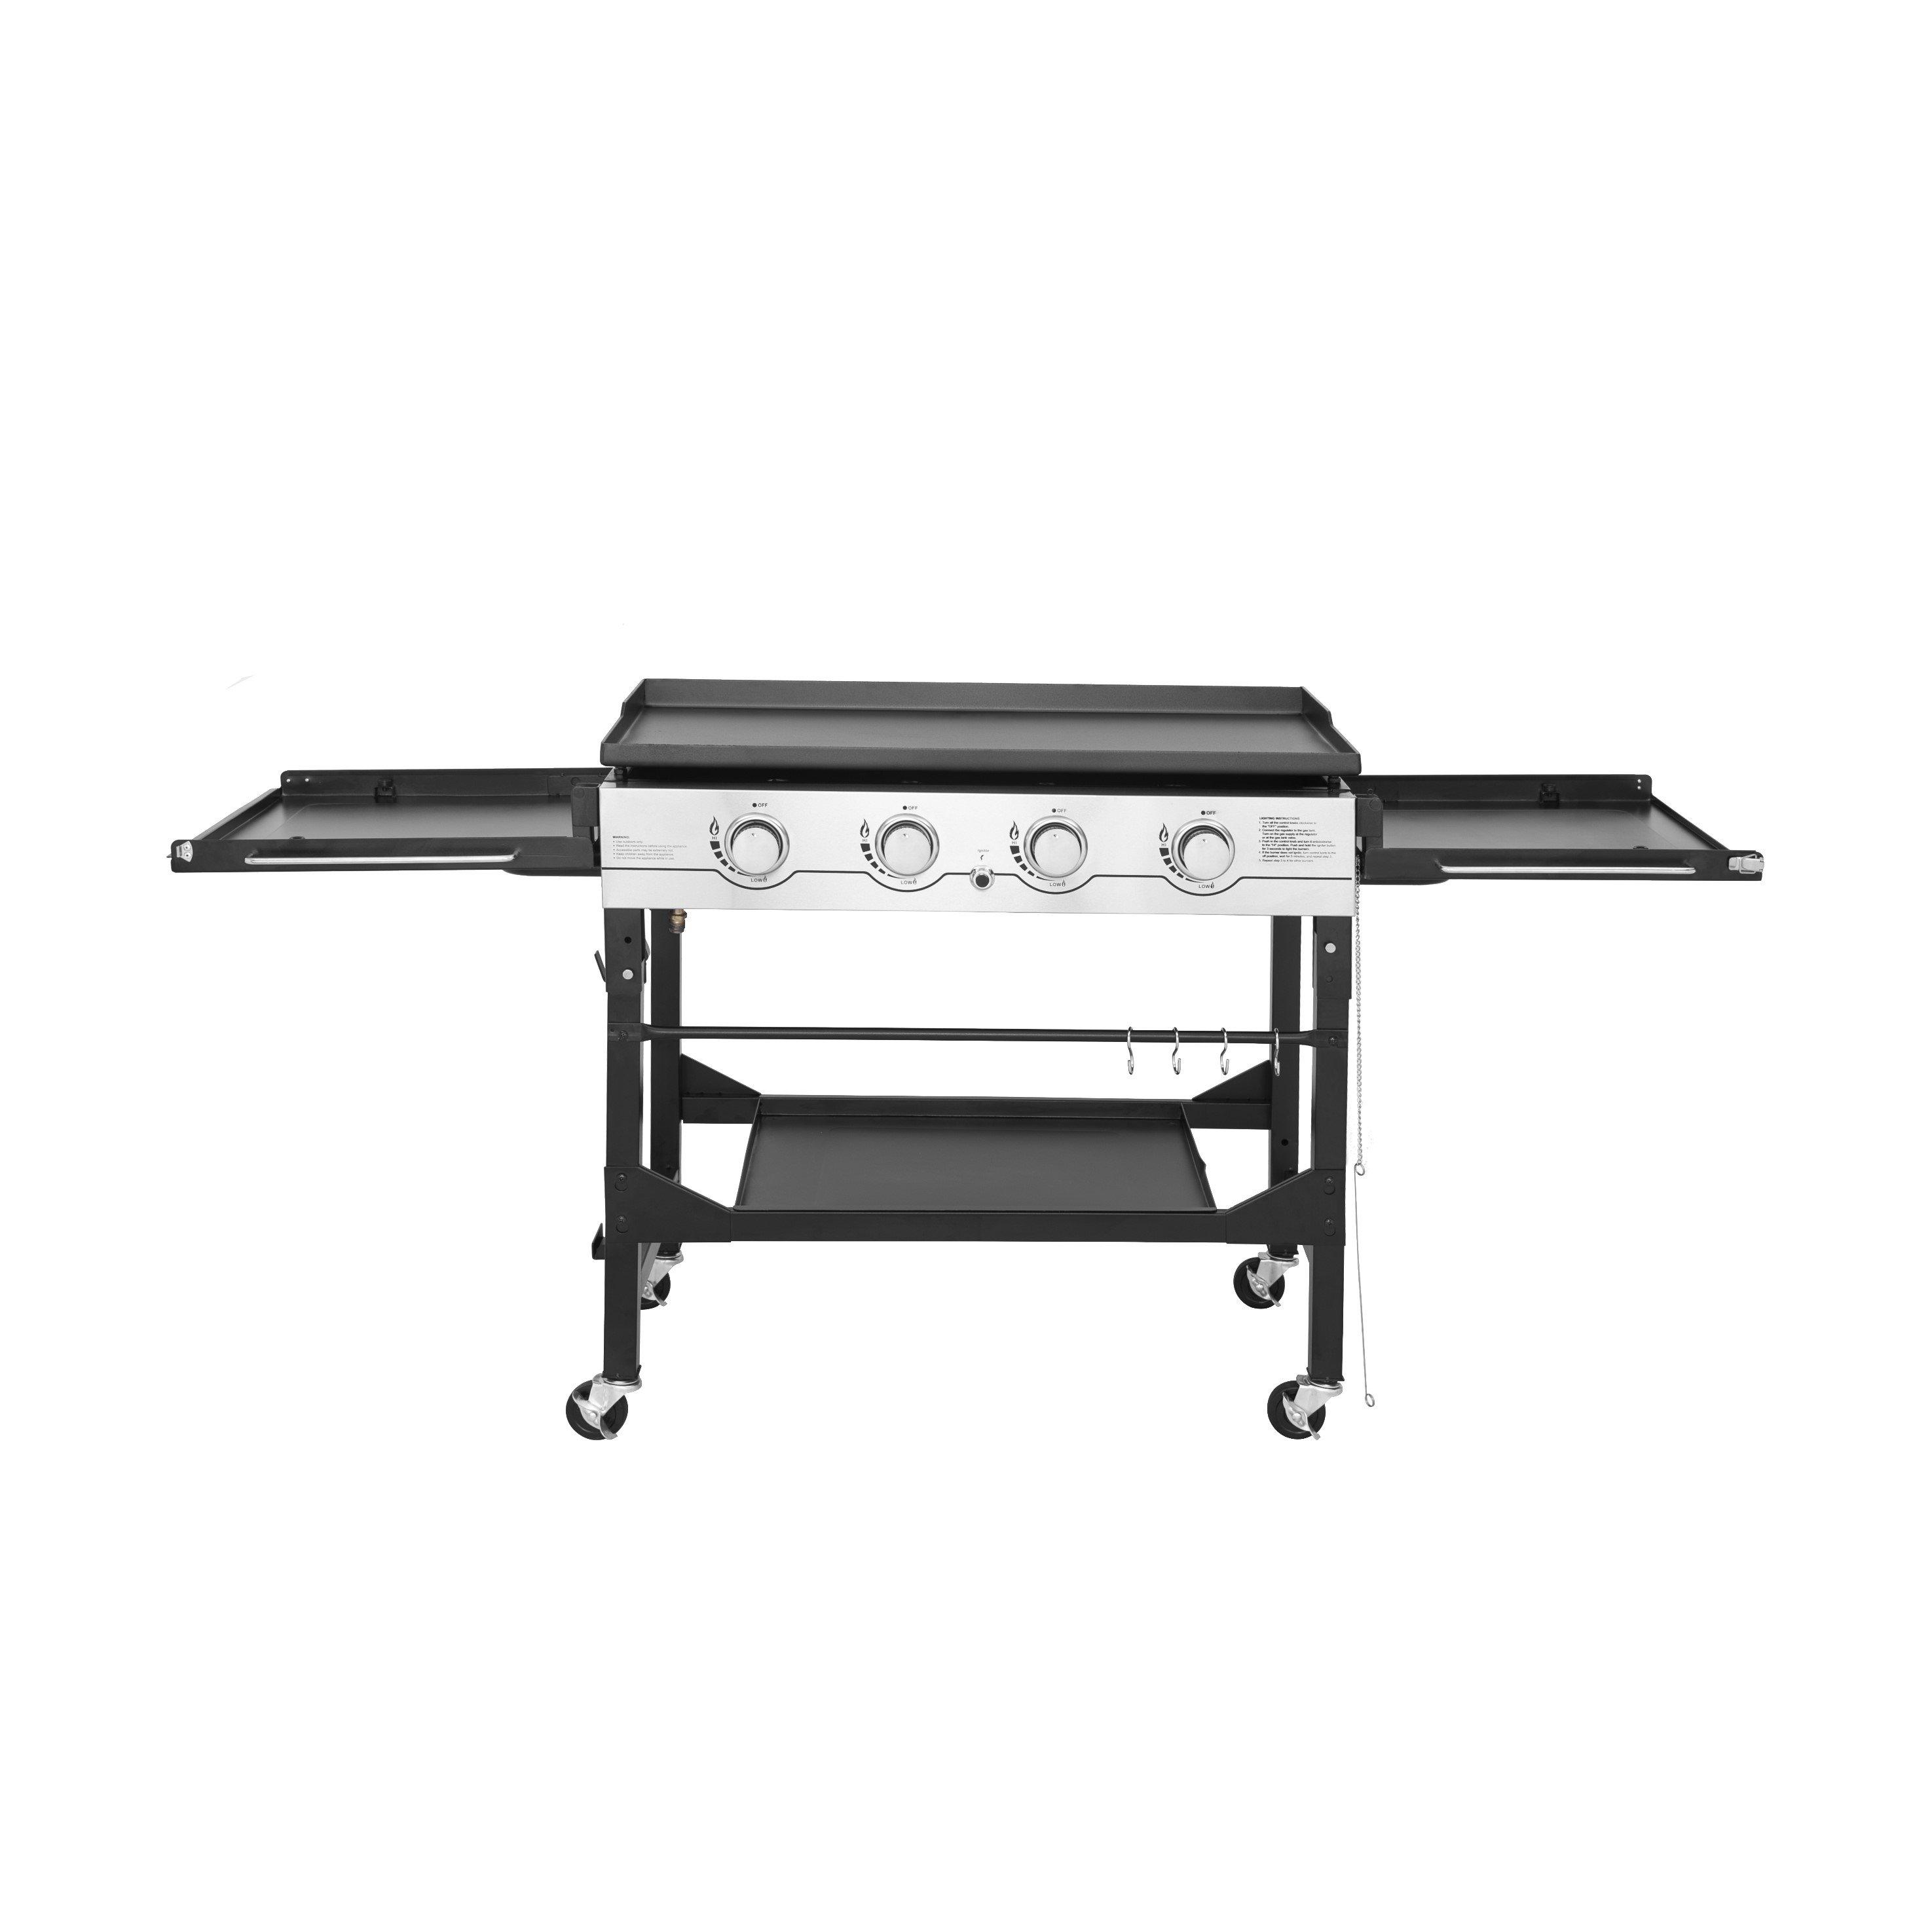 Callow 4 Burner Flat Top Gas Griddle - Outdoor Cooking Griddle 4 x 4kw Hi Power Burners Large 92cm x